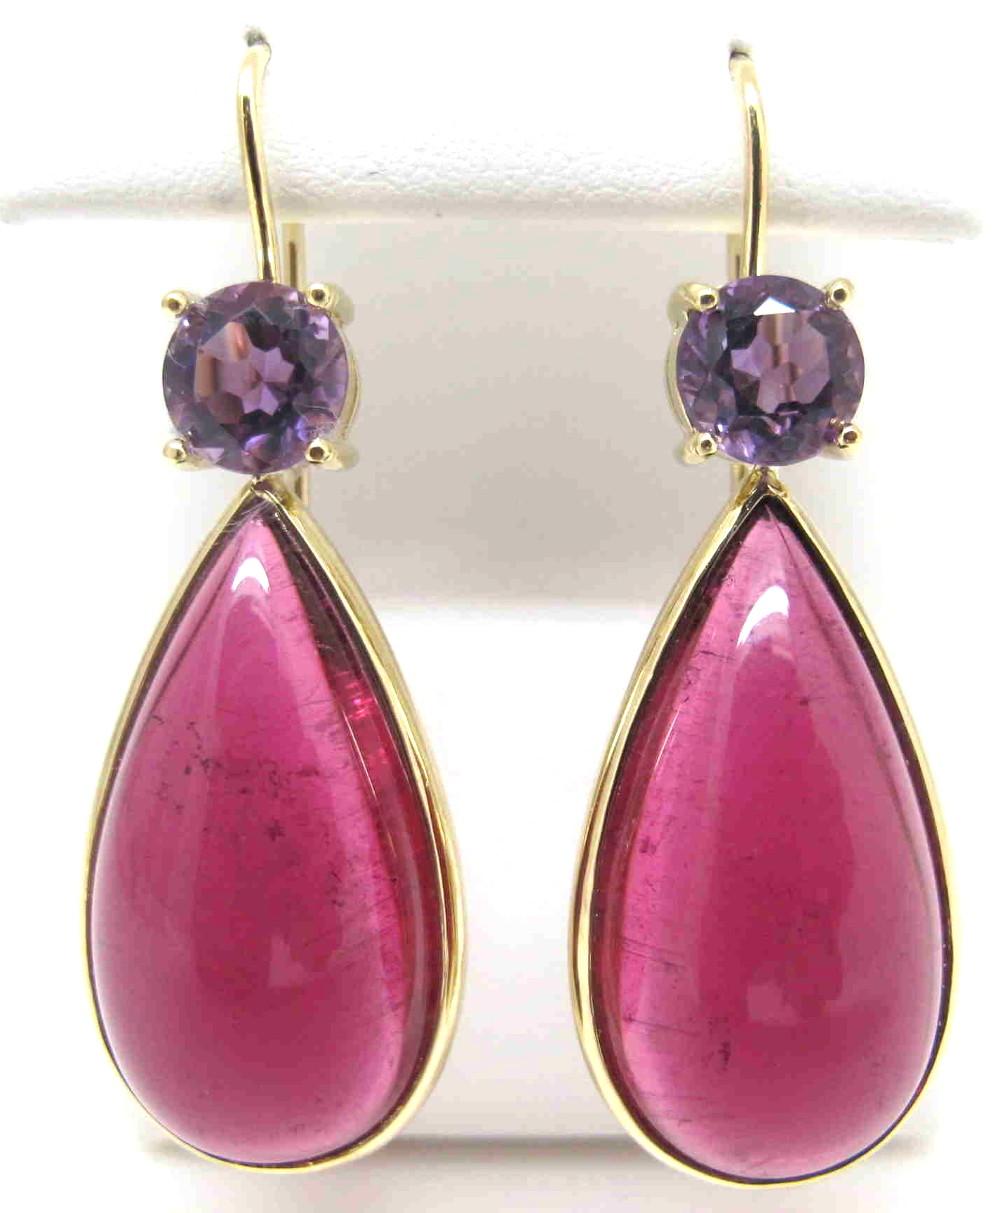 Matched pairs of cabochons of this size, color and clarity are seldom seen! Two giant (25x13mm/36.00 carats total), super fine quality rubellite tourmaline cabochons are featured in these earrings. They are a mouthwatering deep raspberry color that